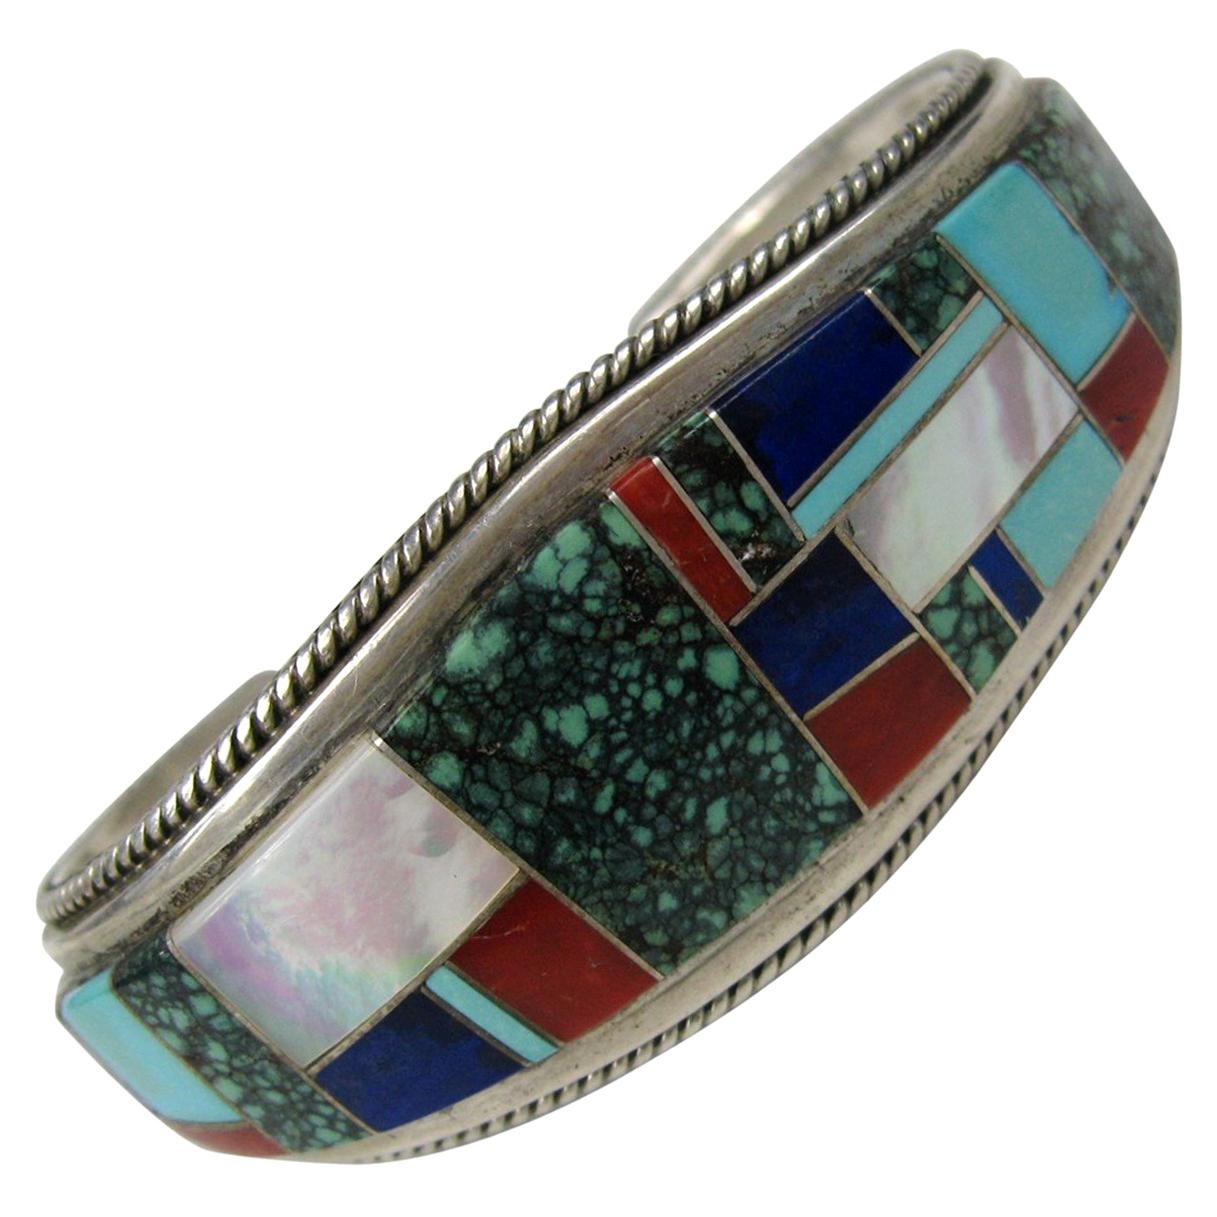  Sterling Silver Turquoise Lapis Coral Cuff Native American Zuni Bracelet